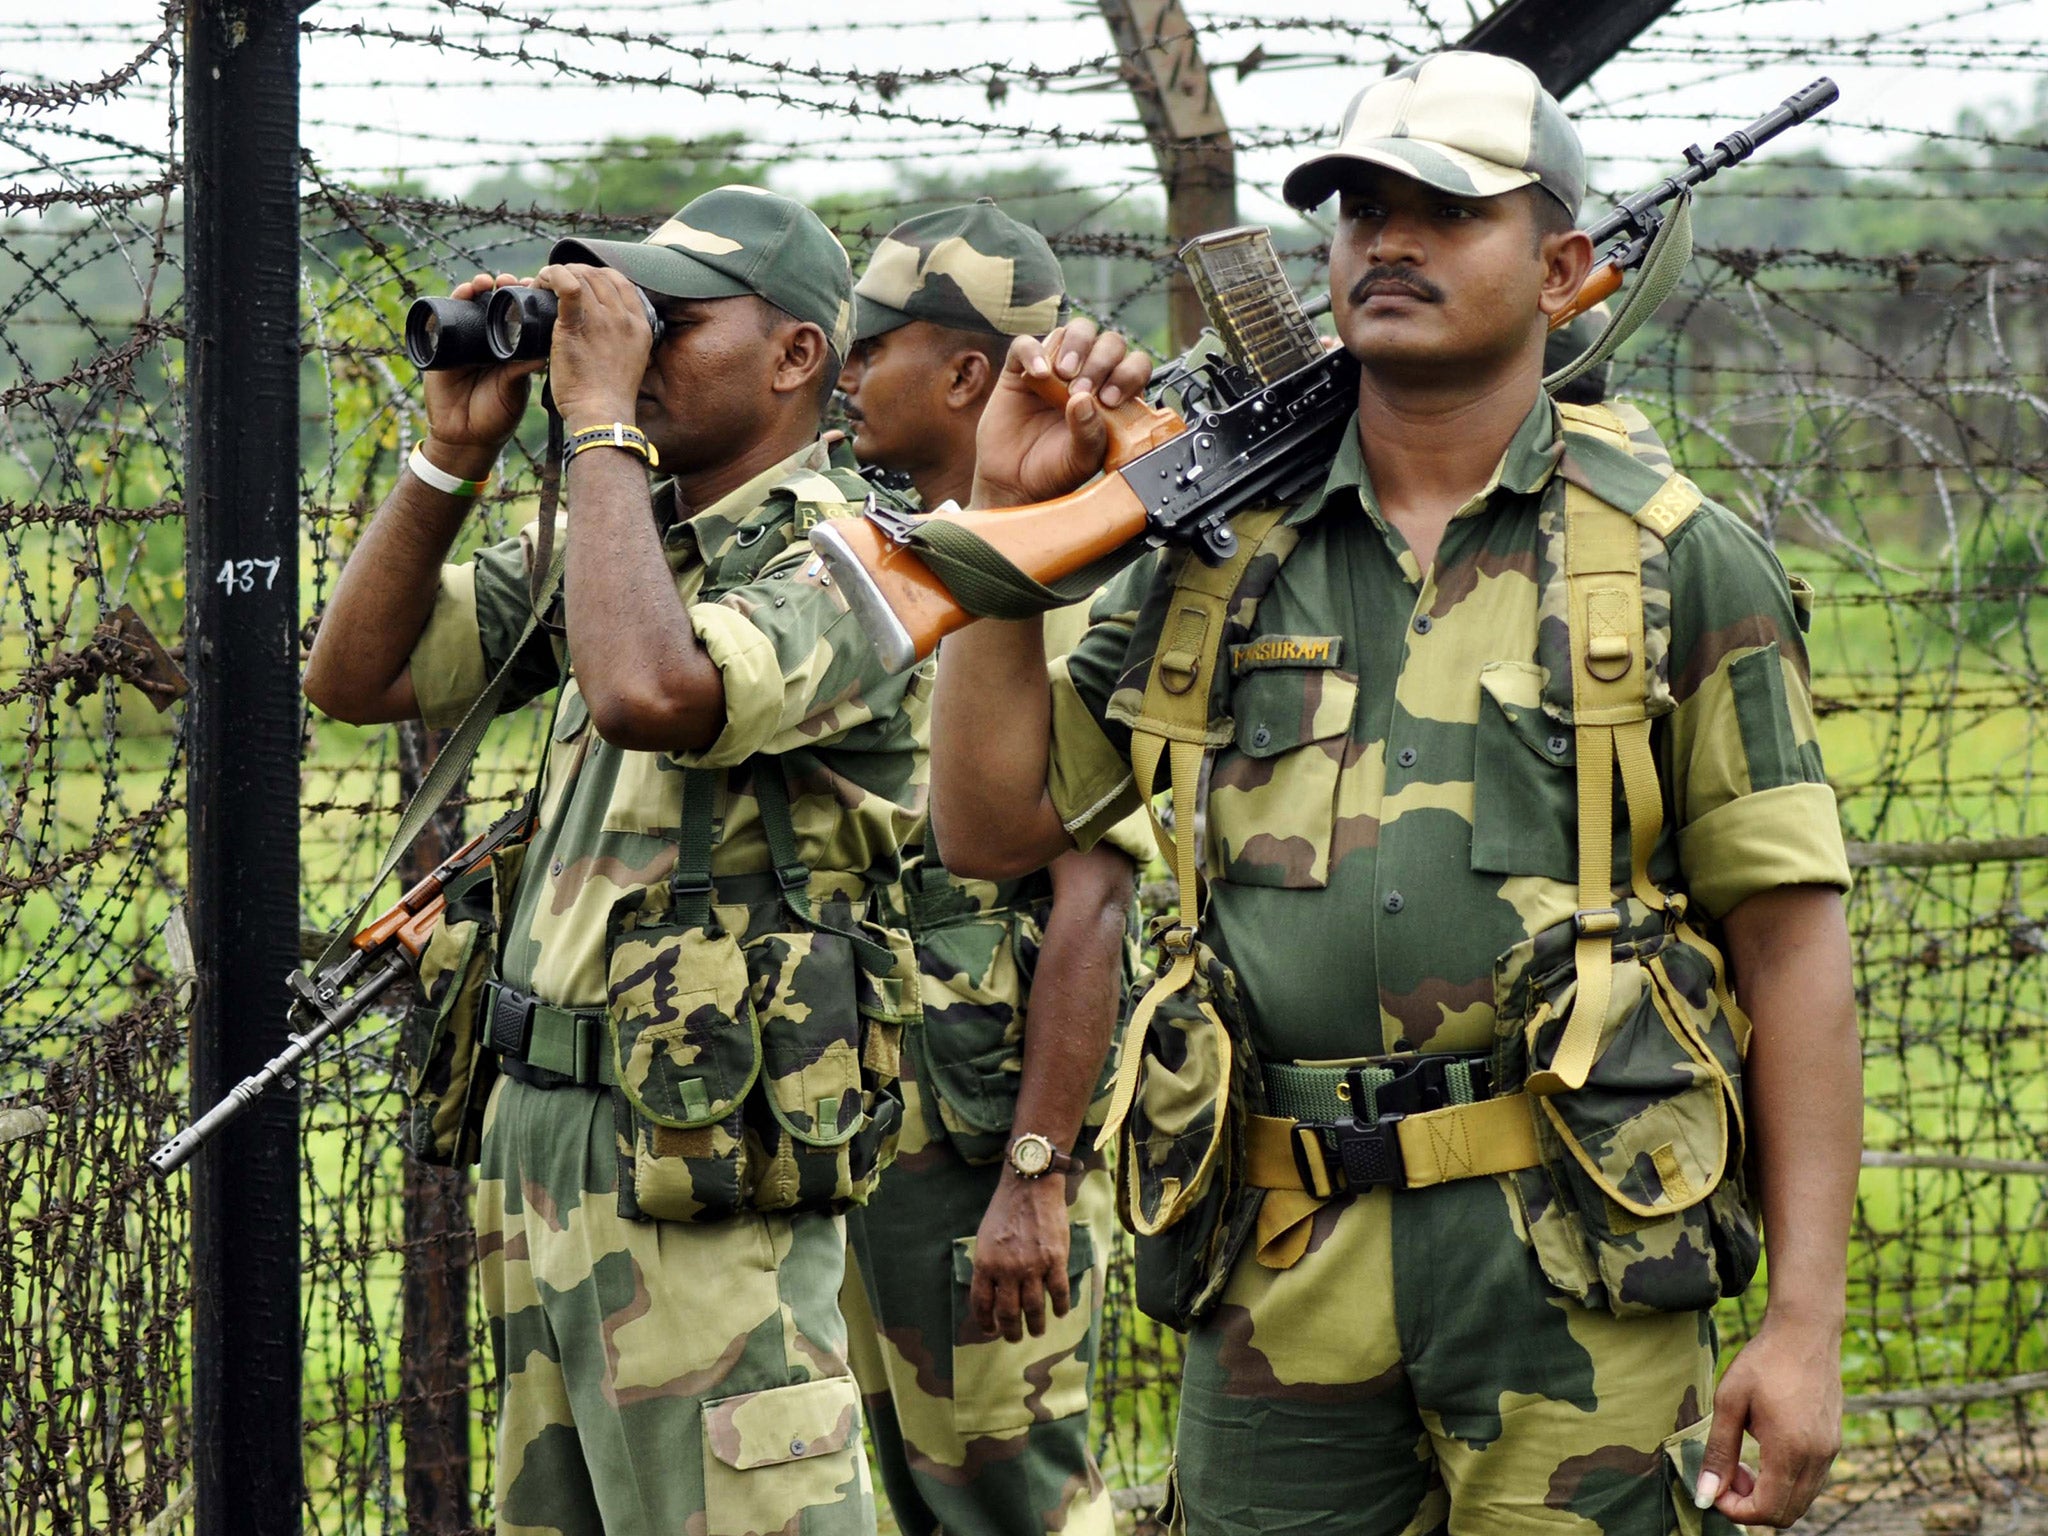 India has 30,000 security force personnel deployed along the border with Bangladesh